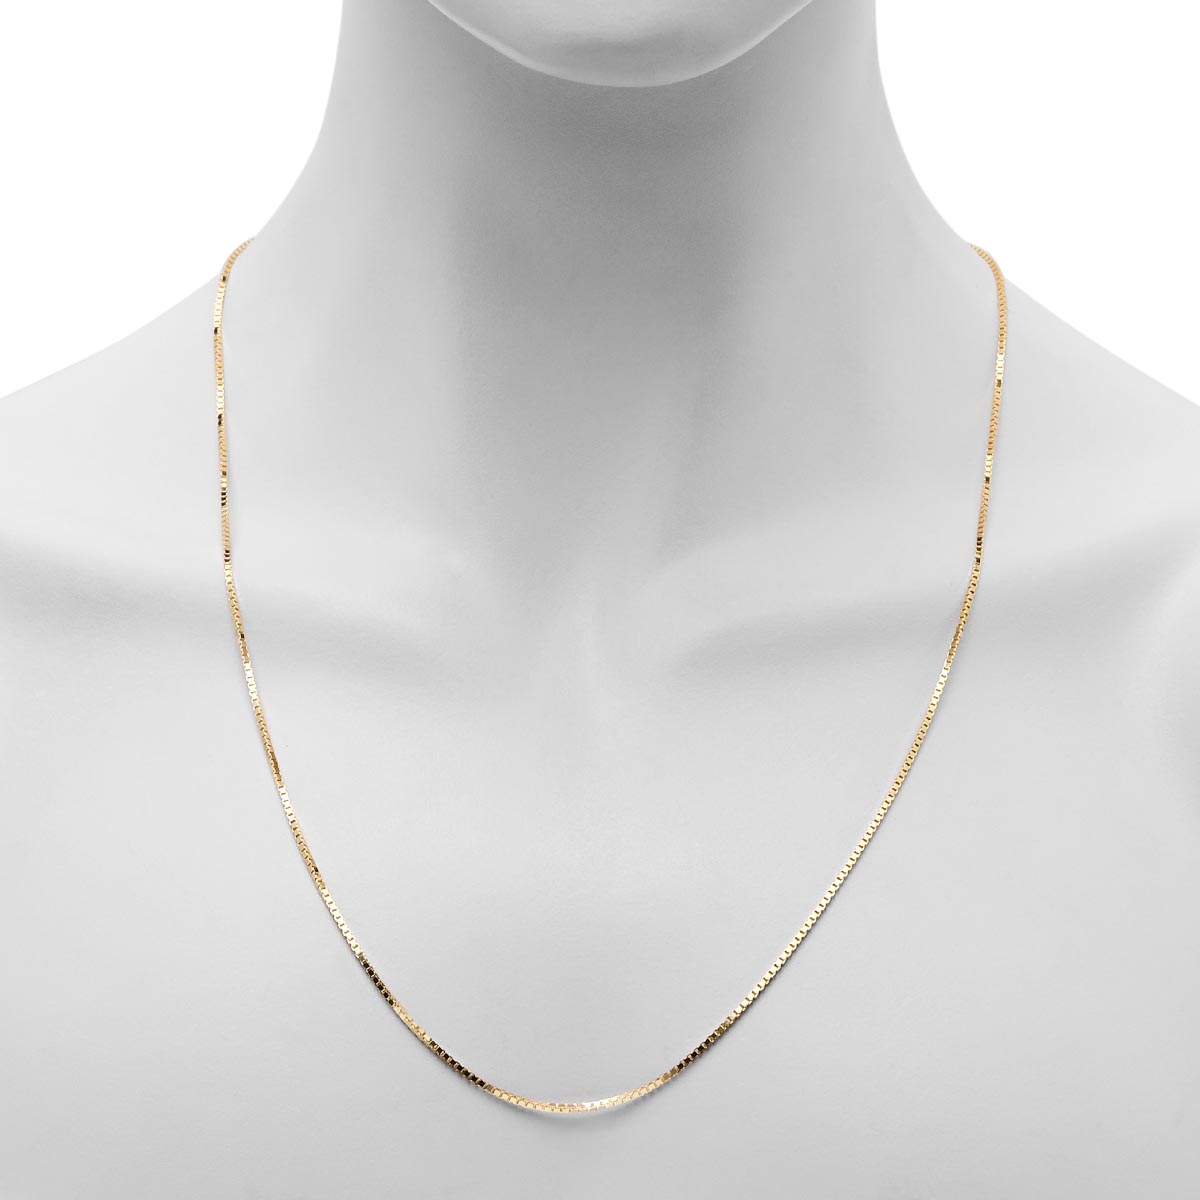 Estate Box Chain in 14kt Yellow Gold (24 inches and 1.5mm wide)